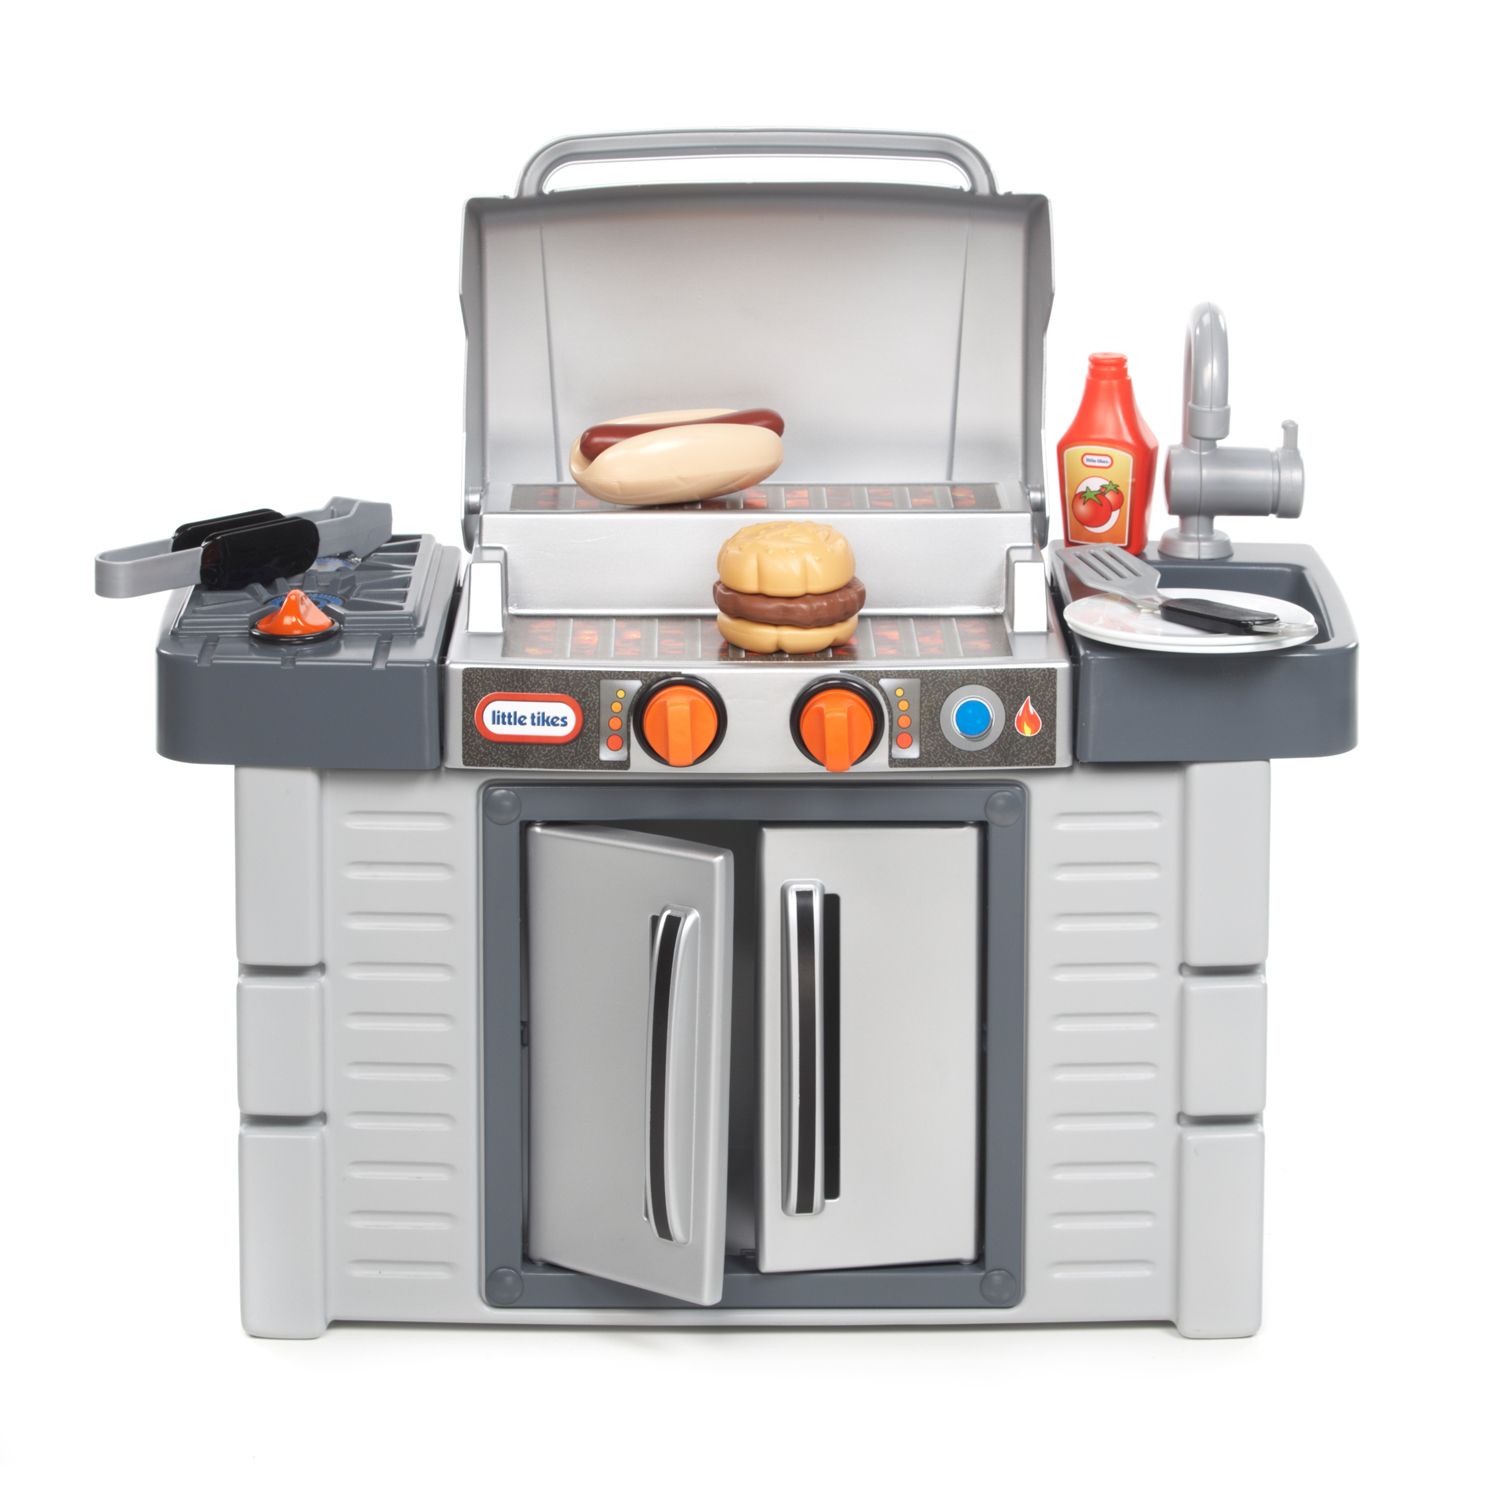 grill playset